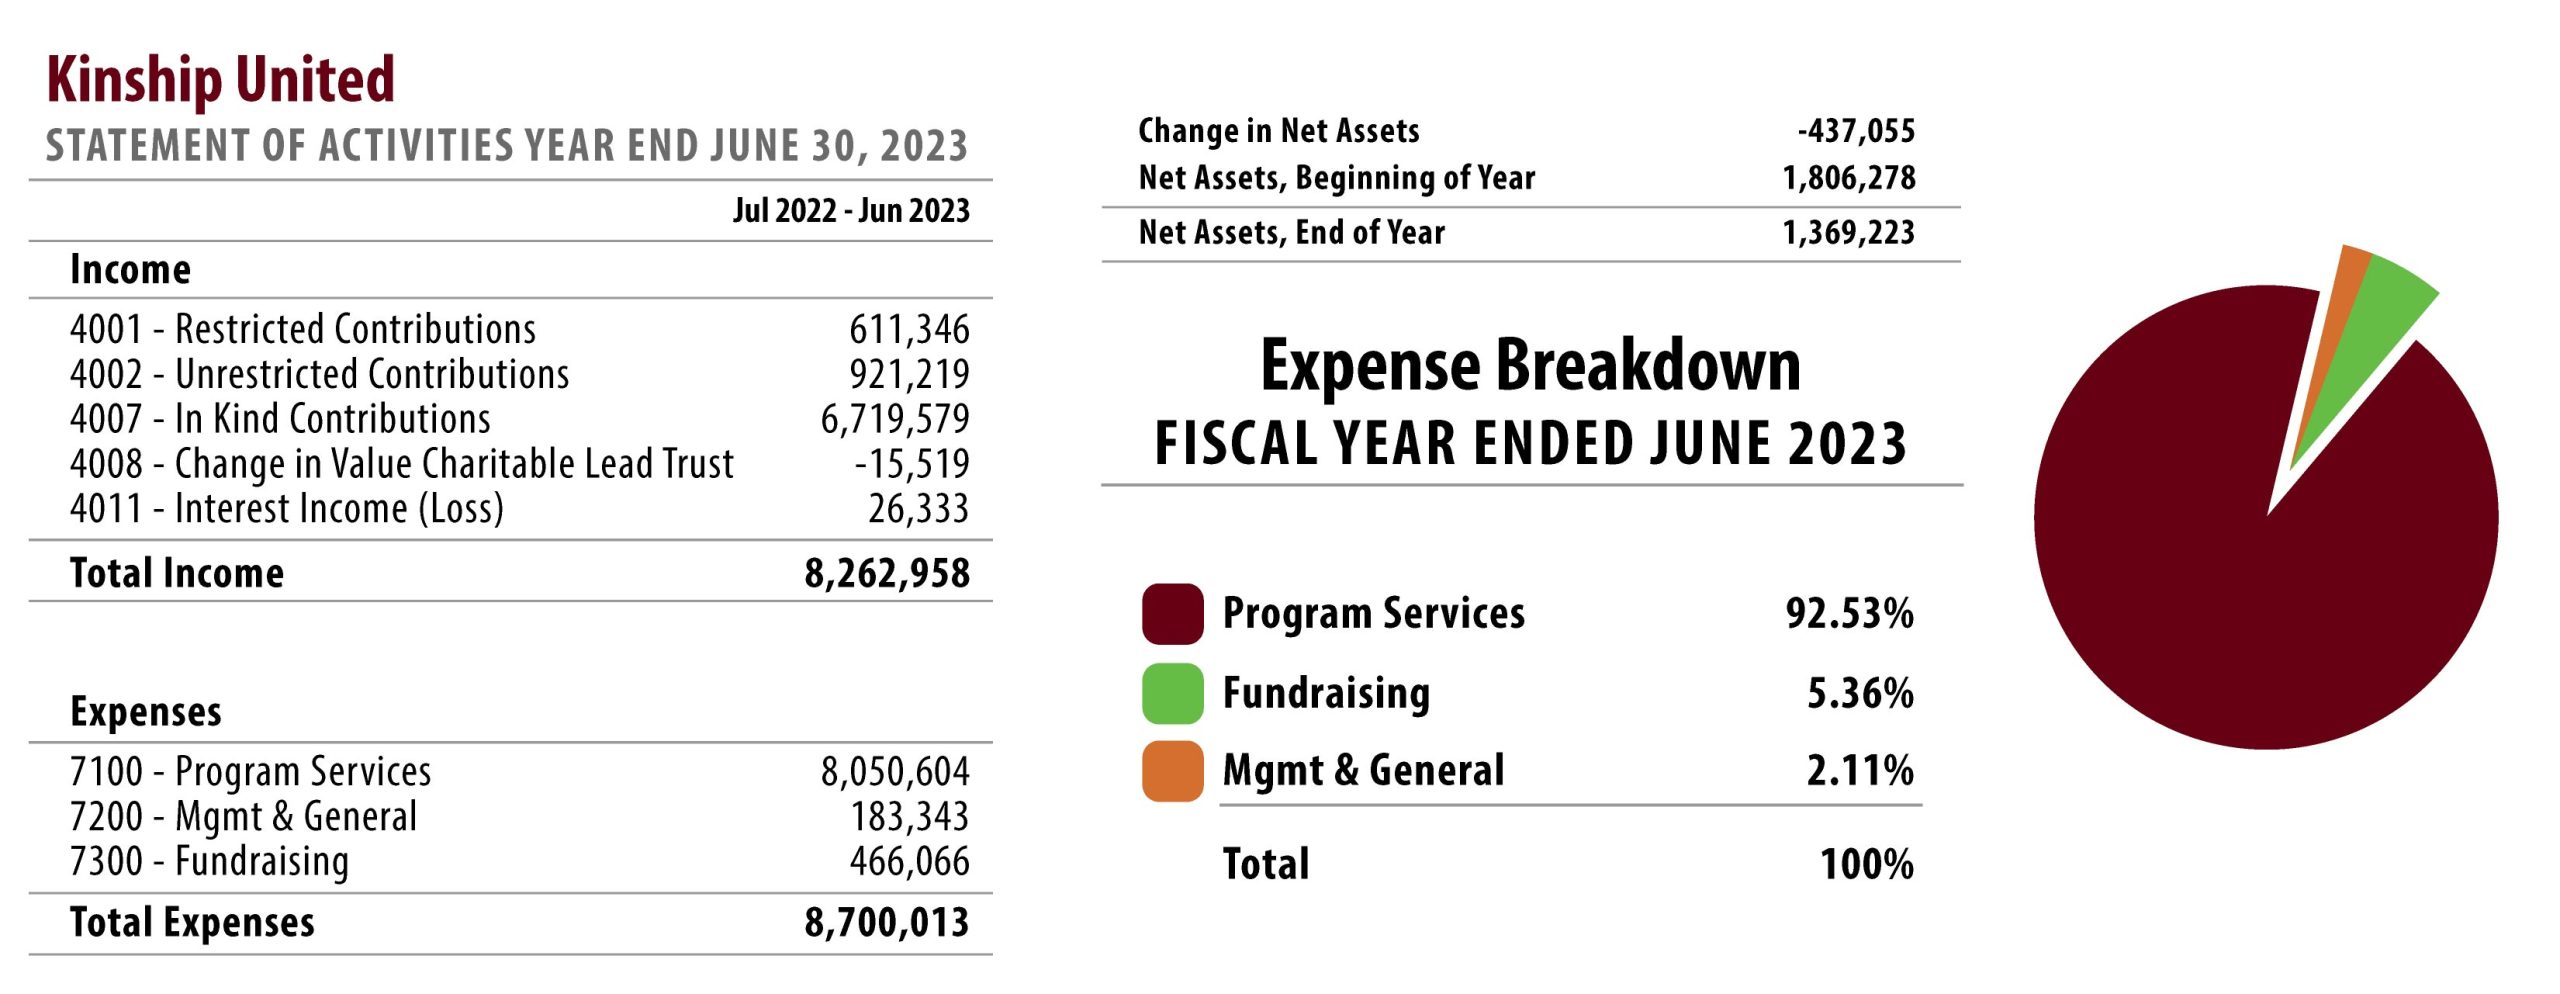 Kinship United's statement of activities and a pie chart depicting our expense breakdown for the fiscal year ending in June 2023.